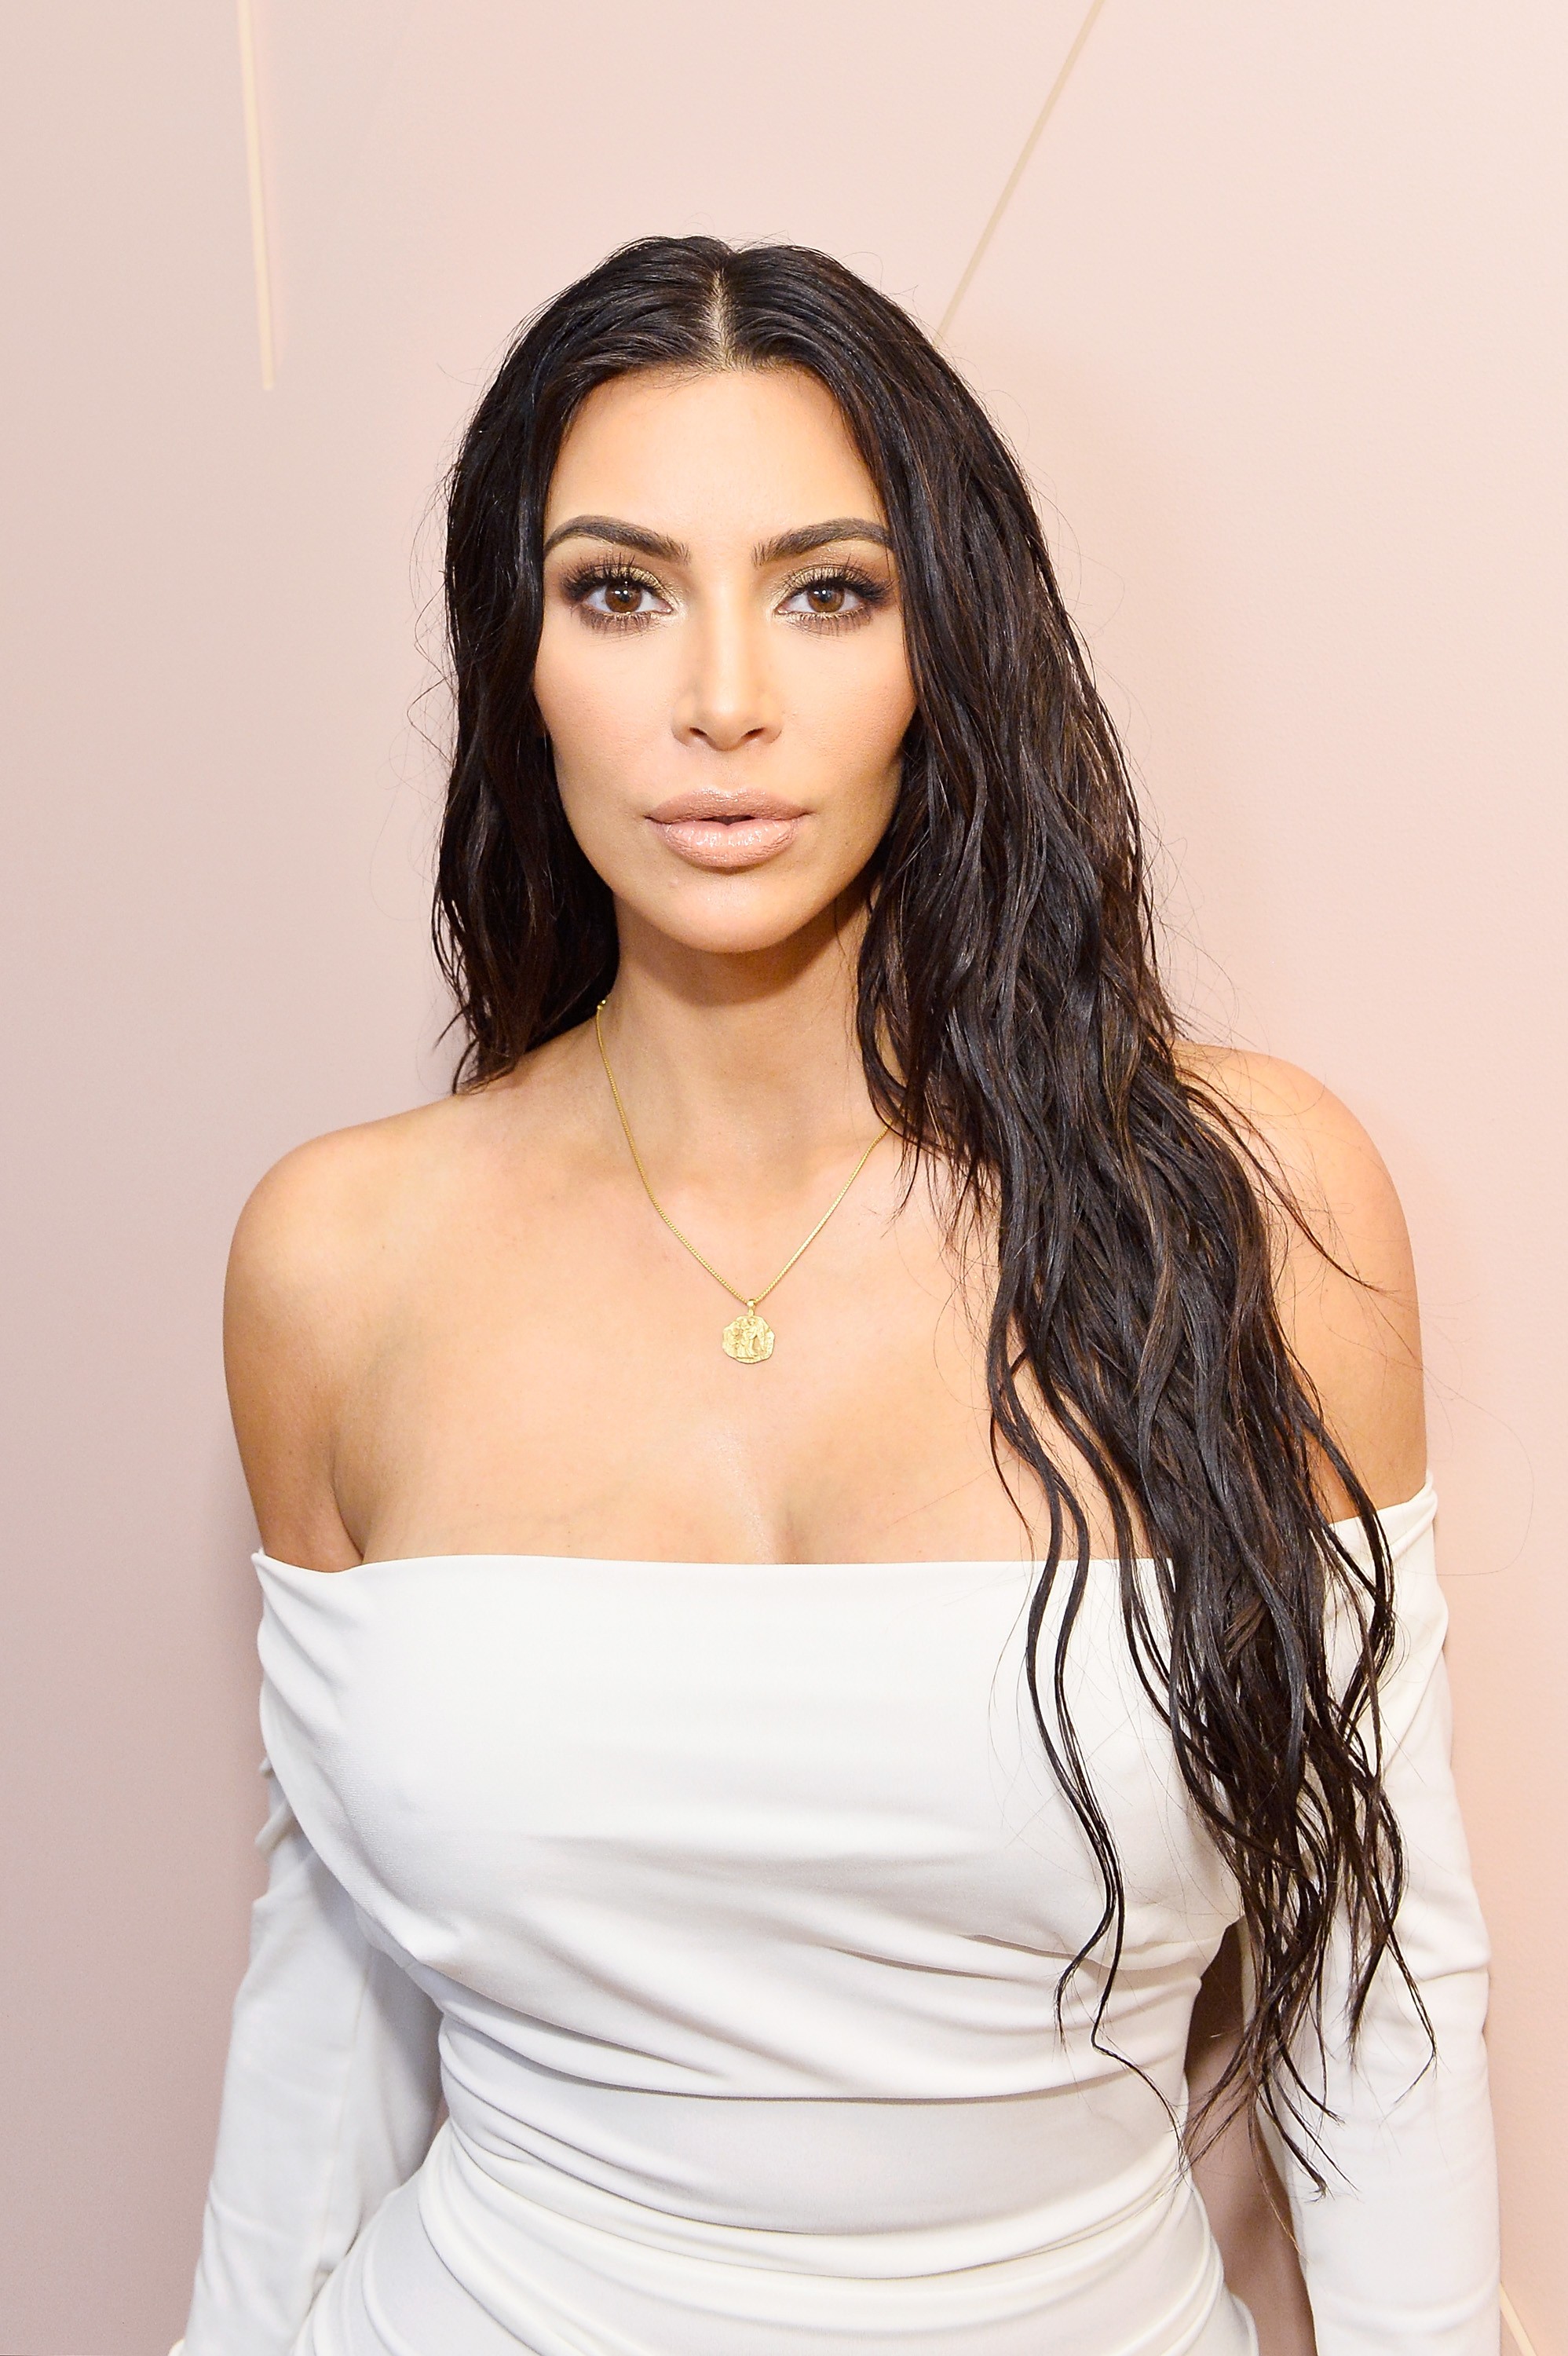 LOS ANGELES, CA - JUNE 20:  Kim Kardashian West celebrates The Launch Of KKW Beauty on June 20, 2017 in Los Angeles, California.  (Photo by Stefanie Keenan/Getty Images for Full Picture) (Foto: Getty Images)